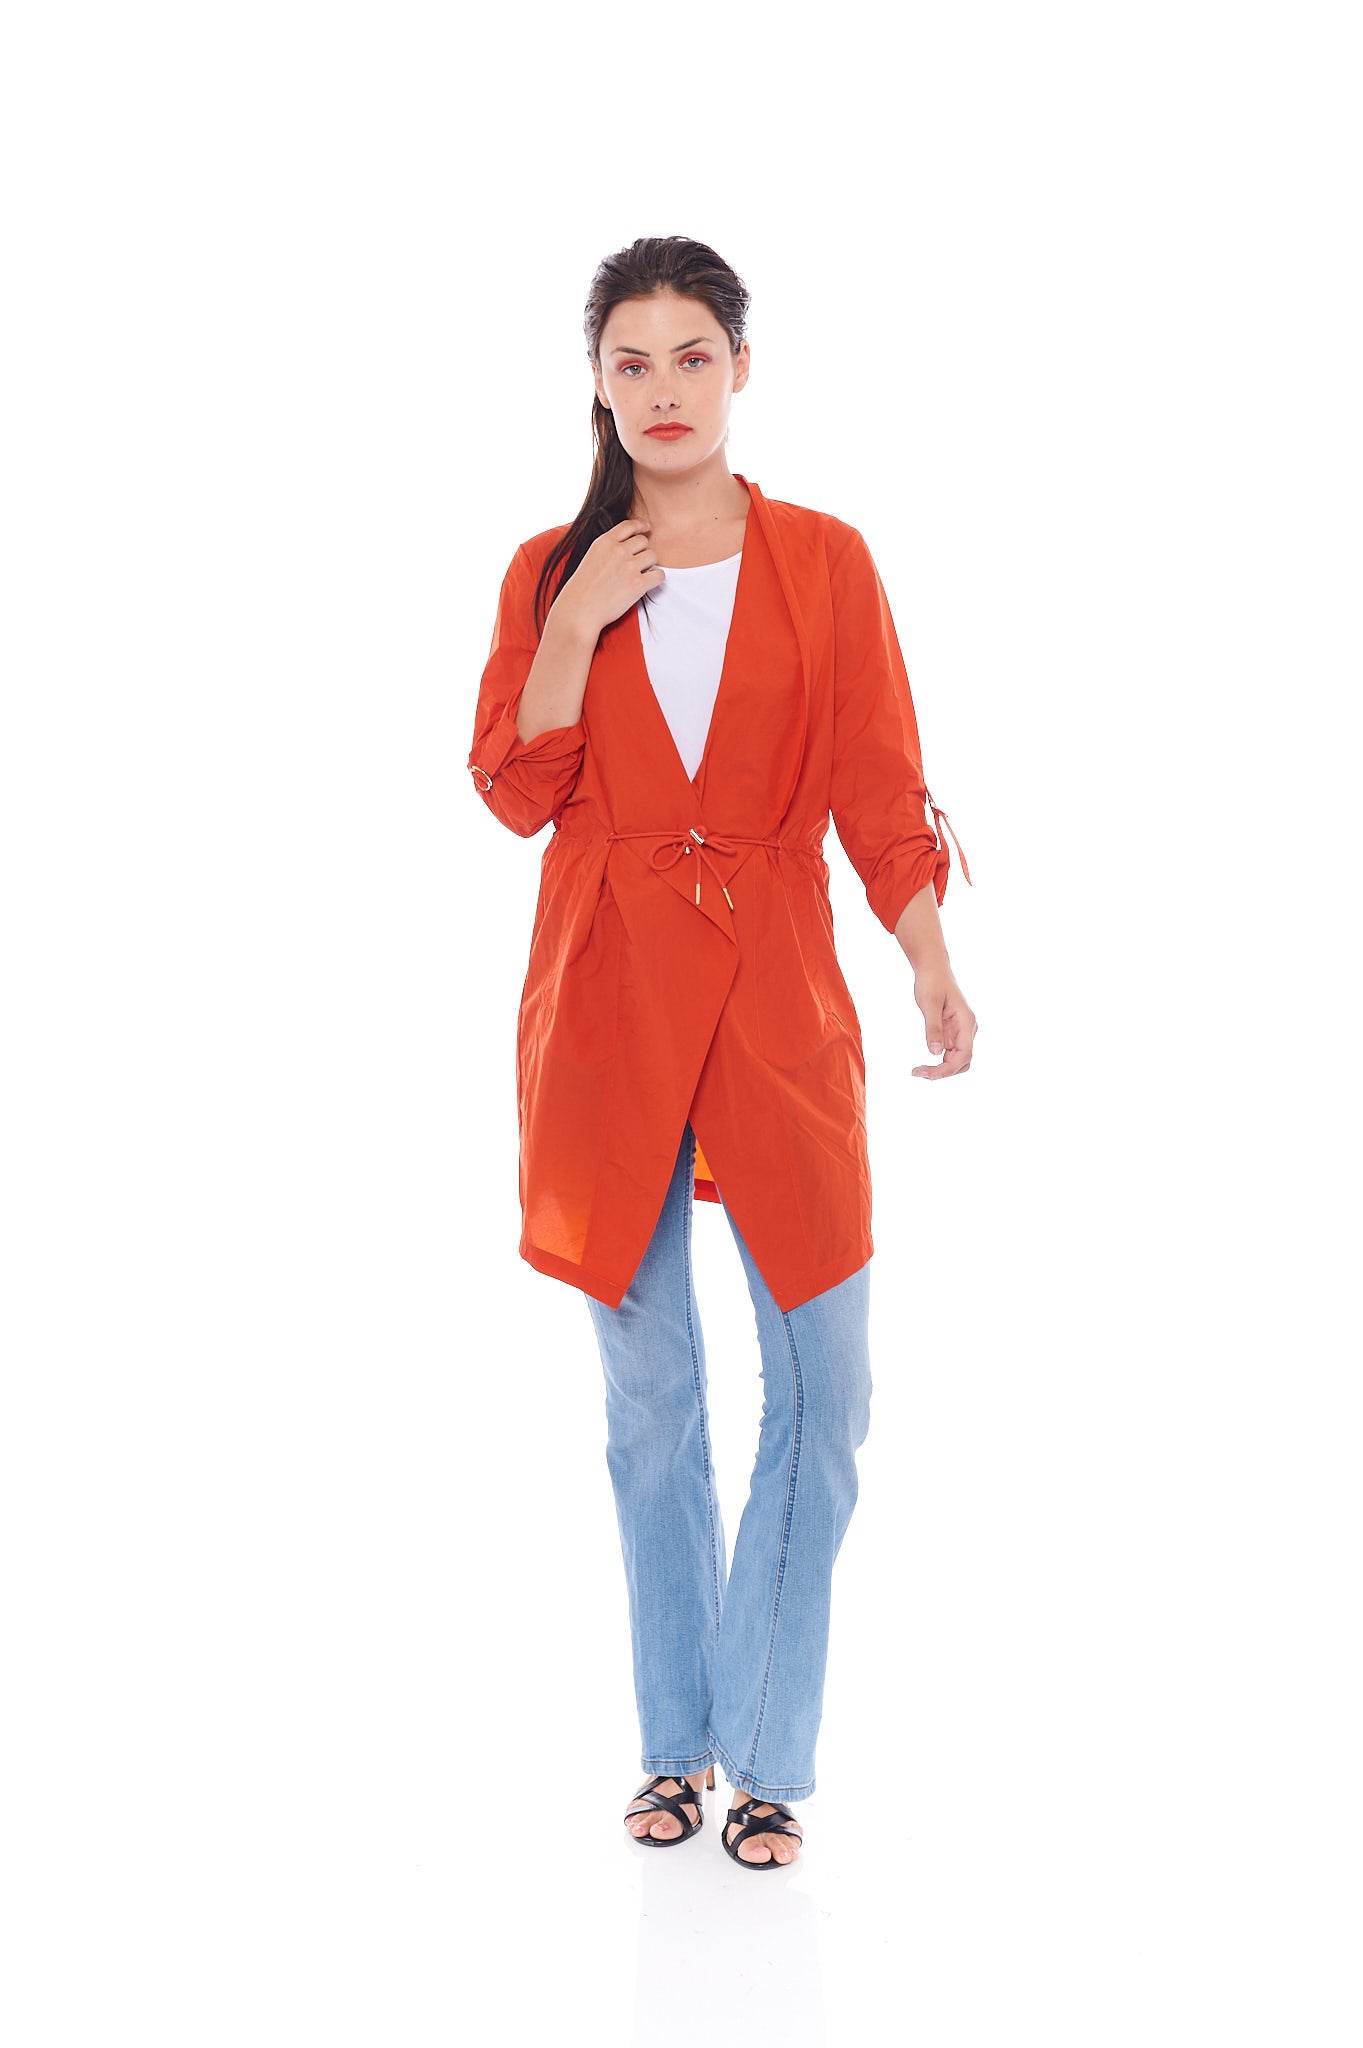 THE CORAL TURNDOWN JACKET IN TANGY ORANGE